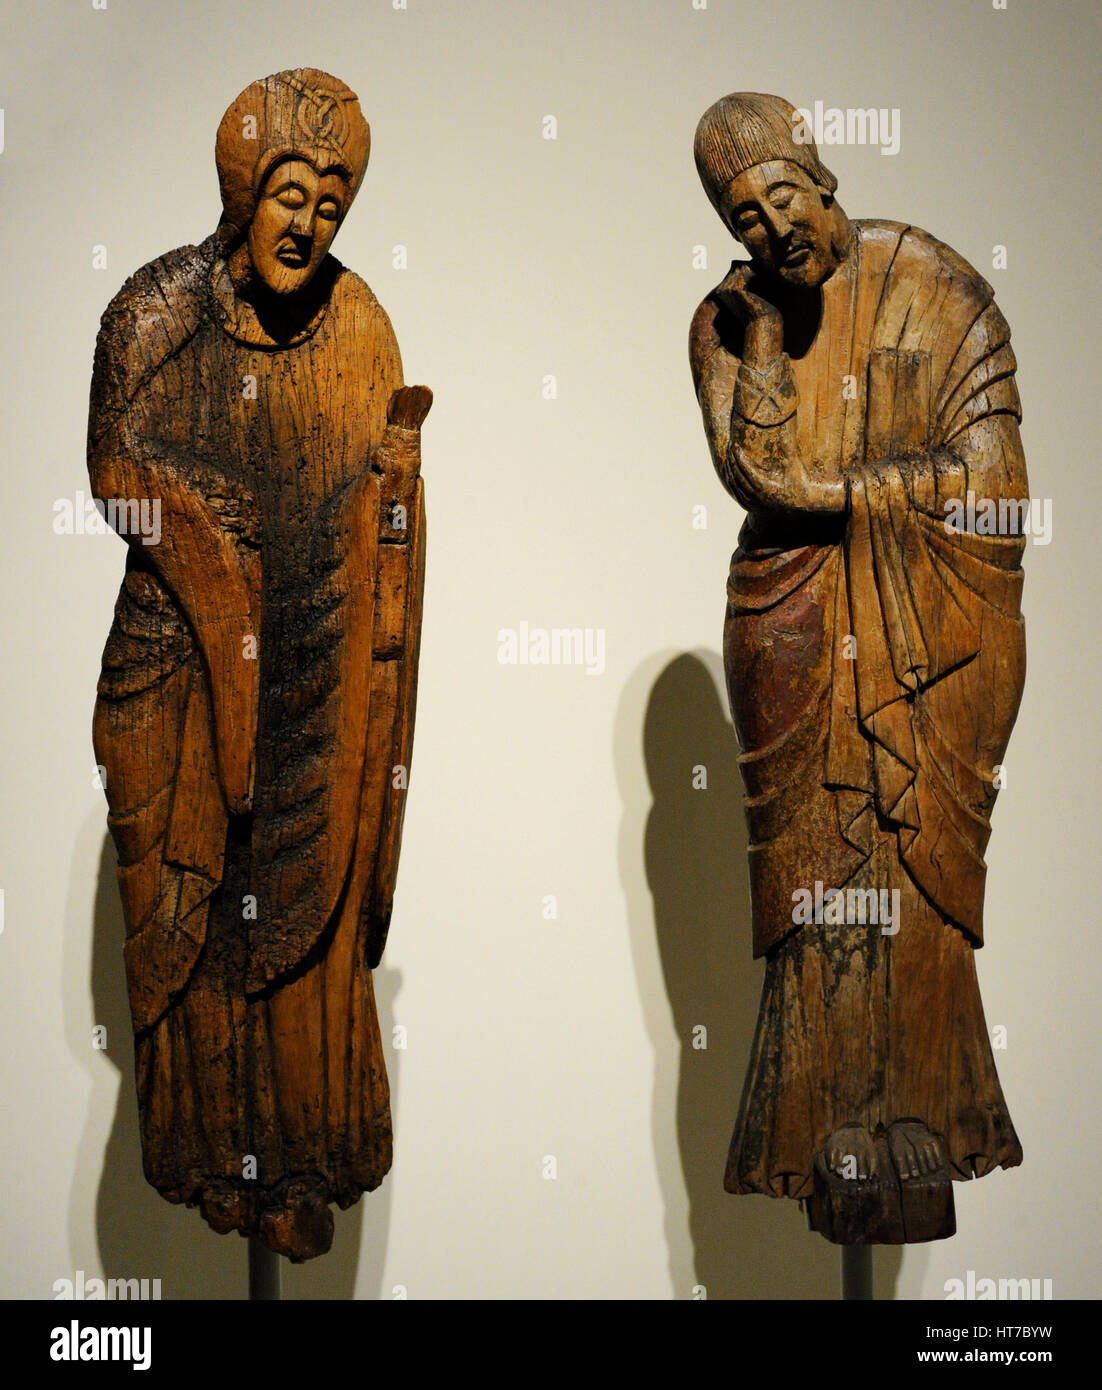 Descent from the Cross. Figures of Virgin Mary and Saint John the Evangelist. Second half of 12th century. Wood. From Parish Church of Saint Eulalia of Erill la Vall (Boi Valley, Catalonia). National Art Museum of Catalonia. Barcelona. Catalonia. Spain. Stock Photo